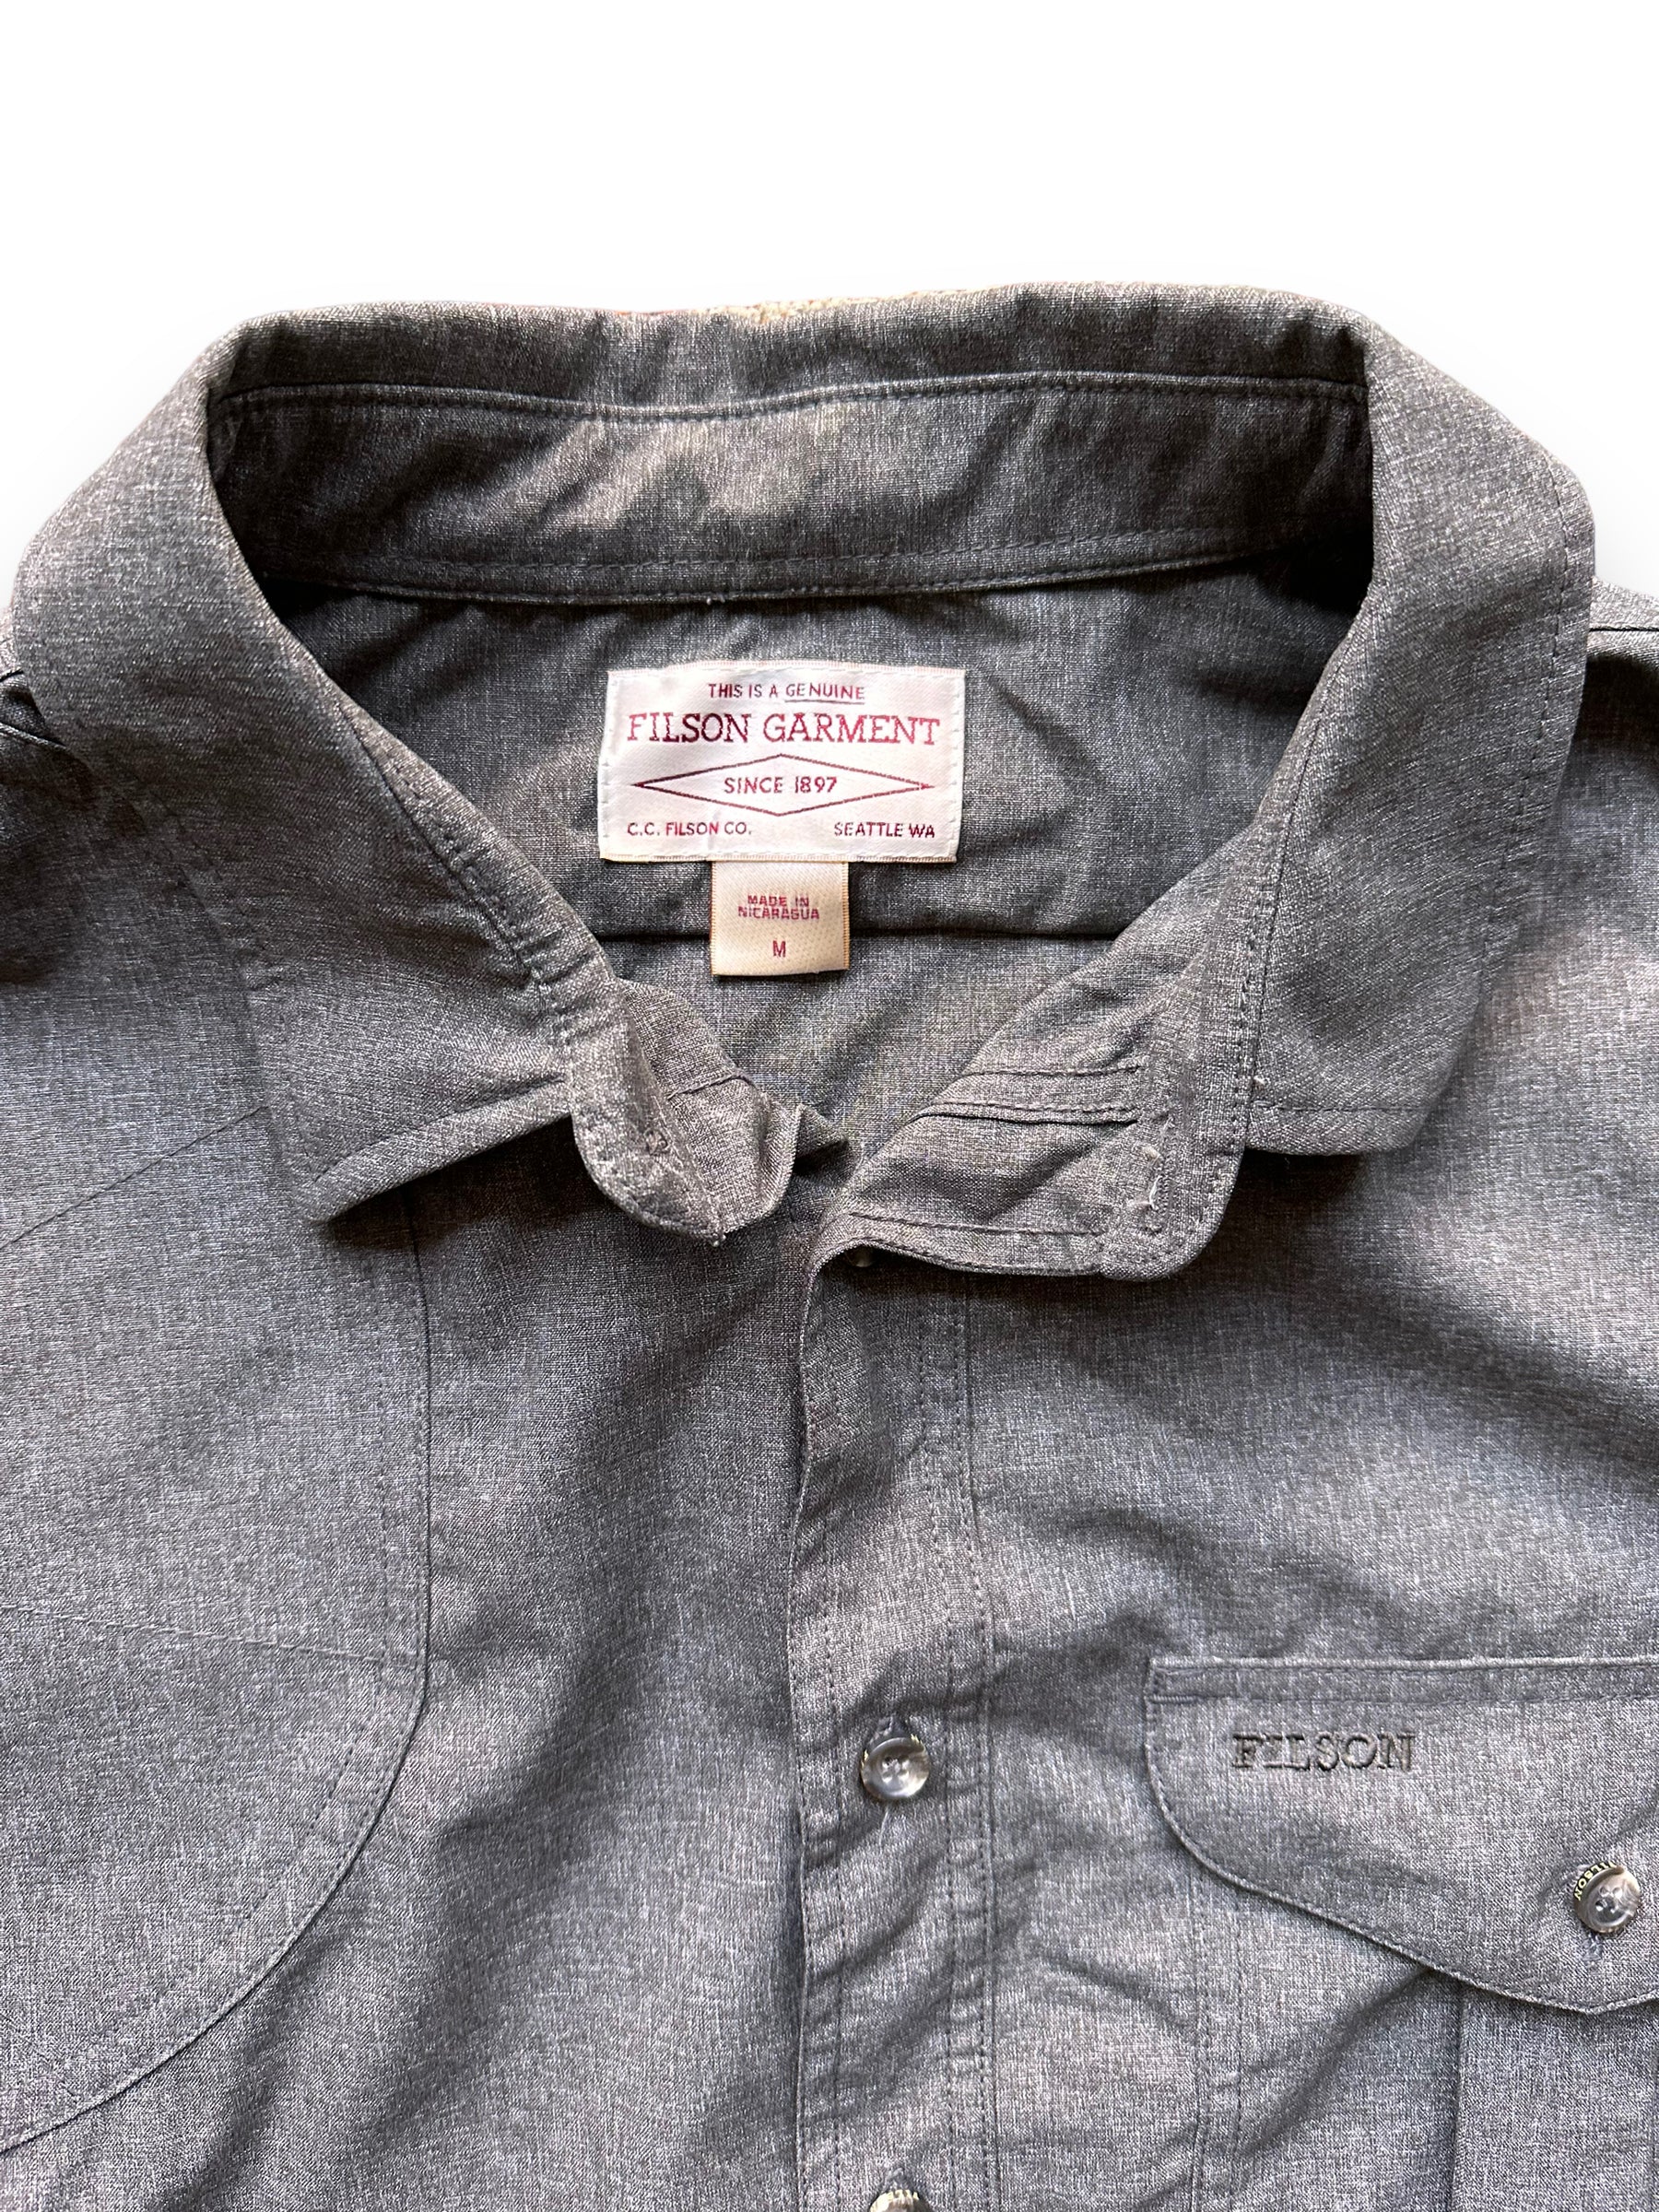 Tag View of Filson Mulch Colored Right Handed Shooting Shirt SZ M |  Barn Owl Vintage Goods | Vintage Filson Workwear Seattle